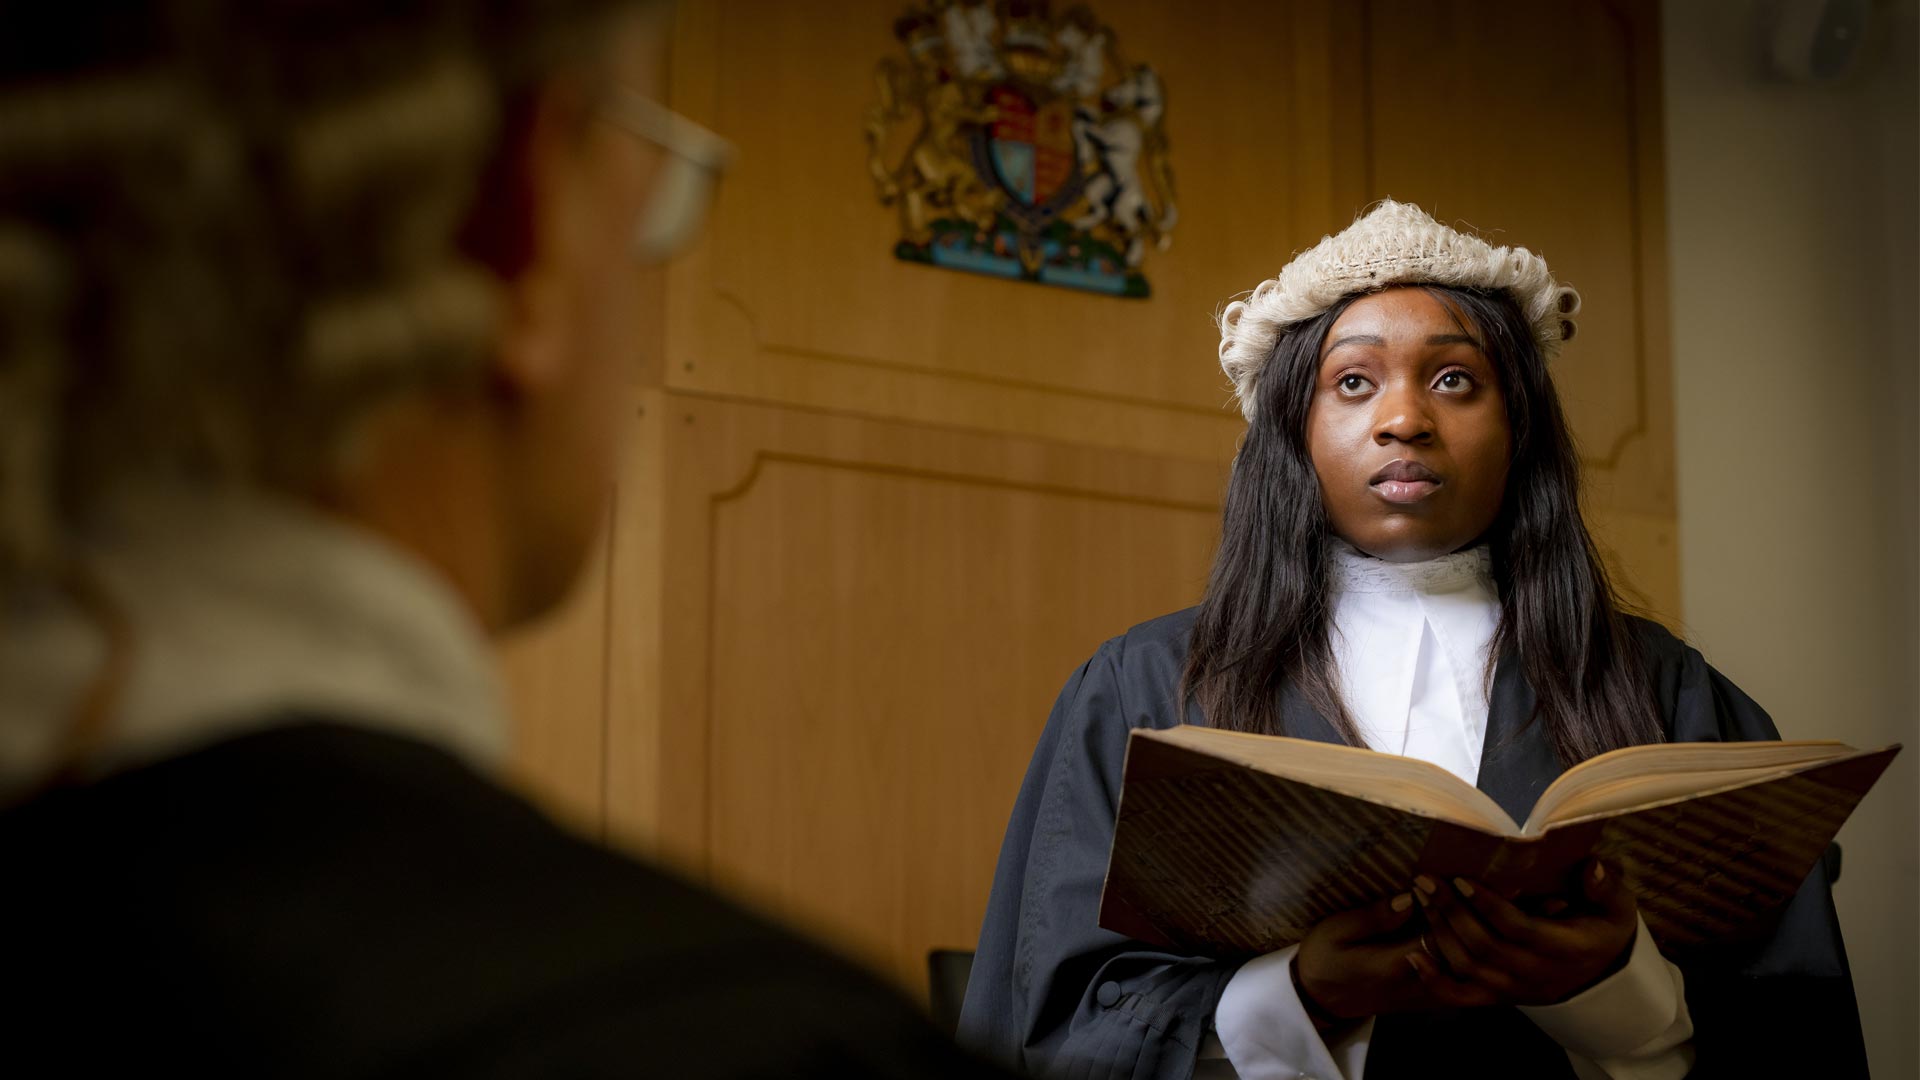 Female student standing in a mock court room wearing  robes and wig, holding an open book